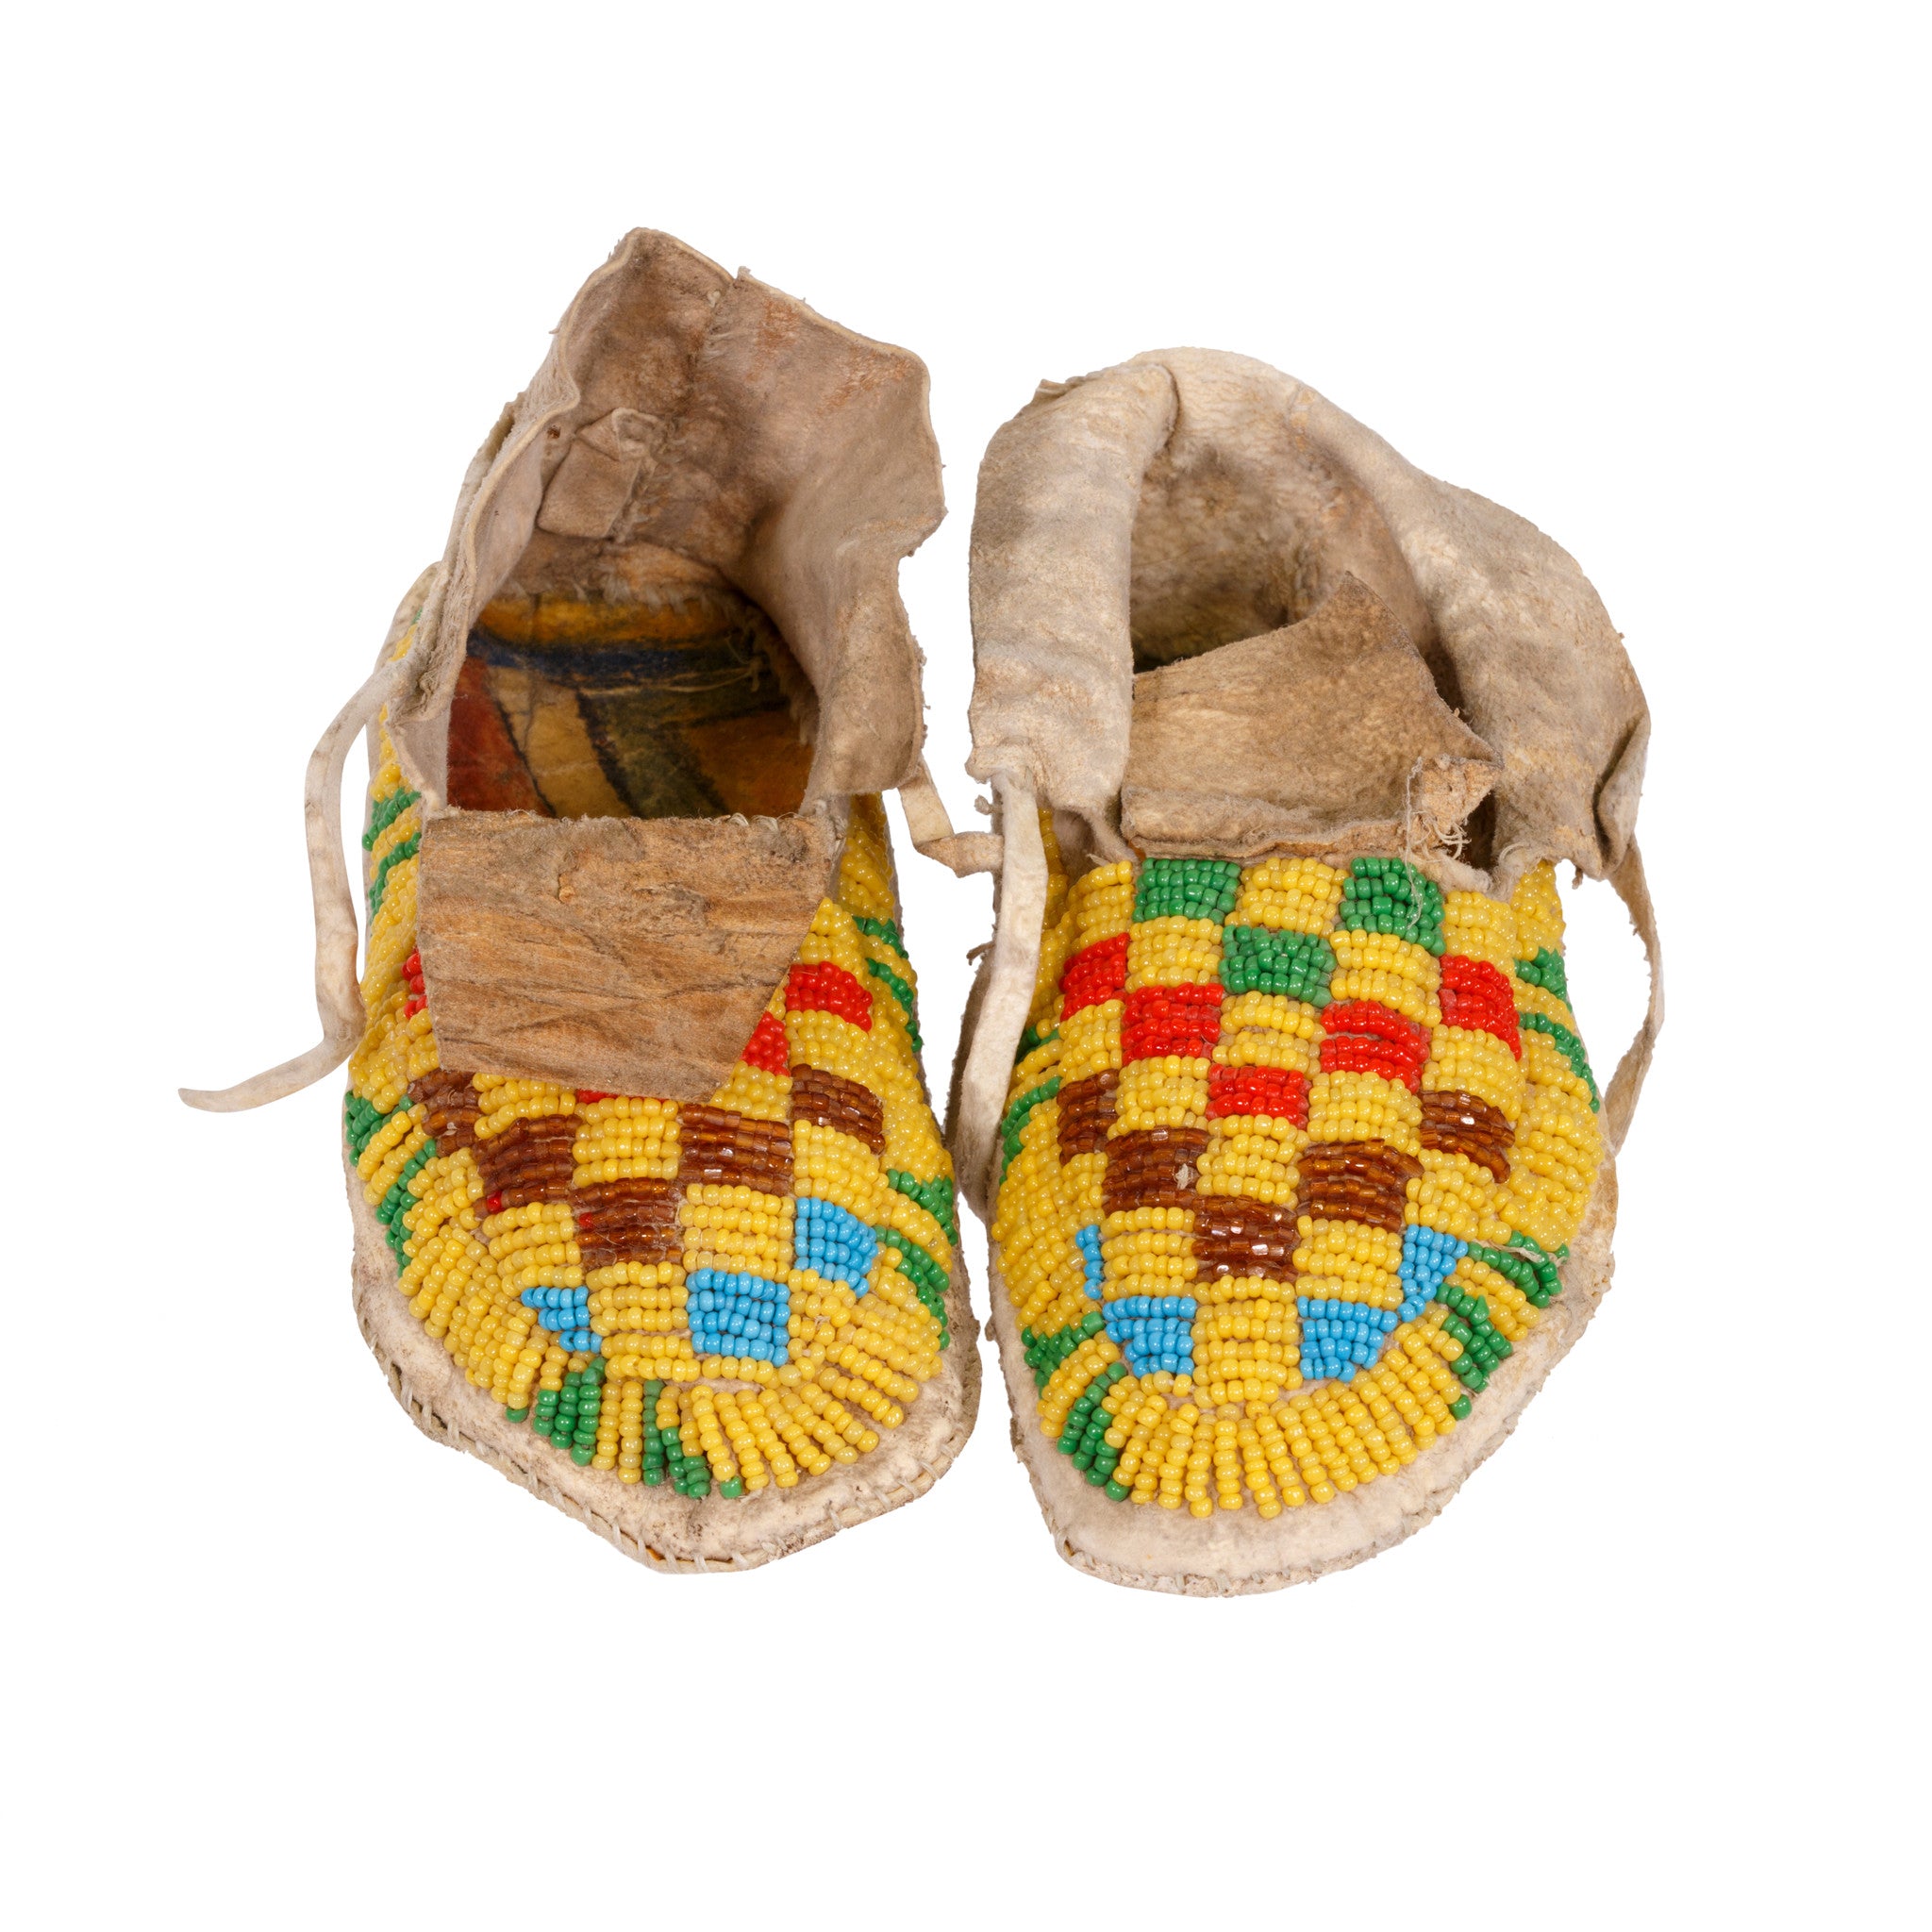 Sioux Child’s Moccasins, Native, Garment, Moccasins